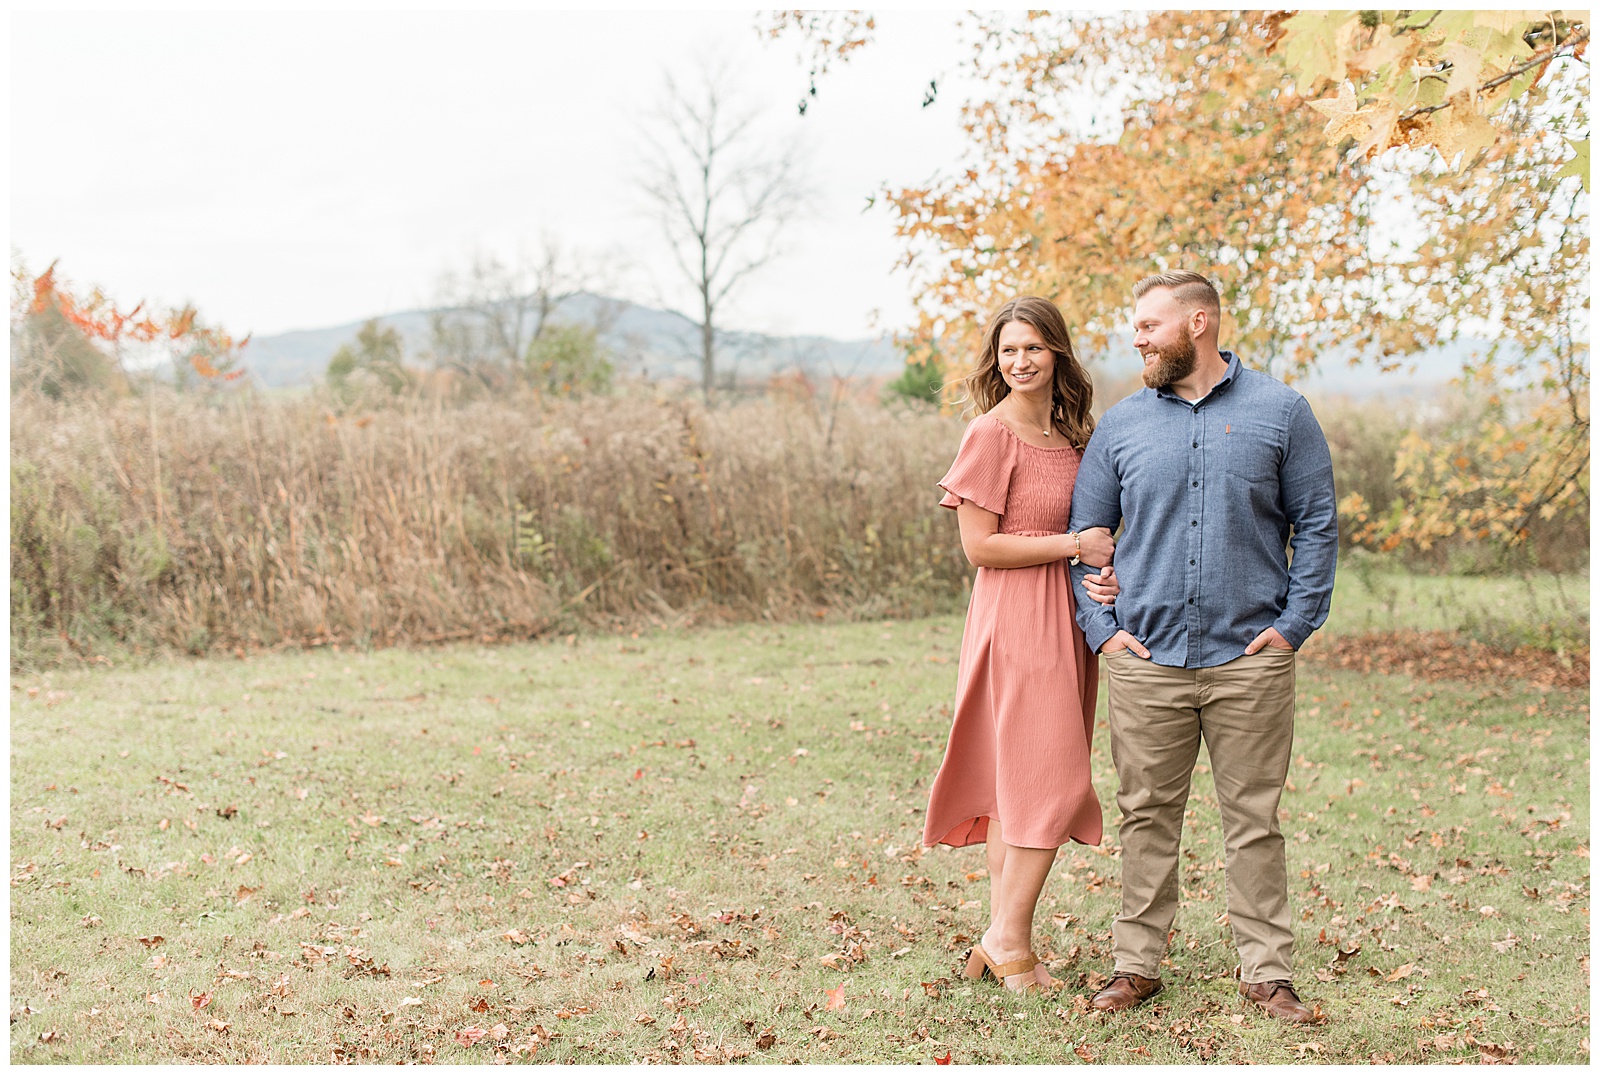 woman wrapping her arms around guy's right arm as he smiles and looks at her near colorful tree and wild grasses in lititz pennsylvania